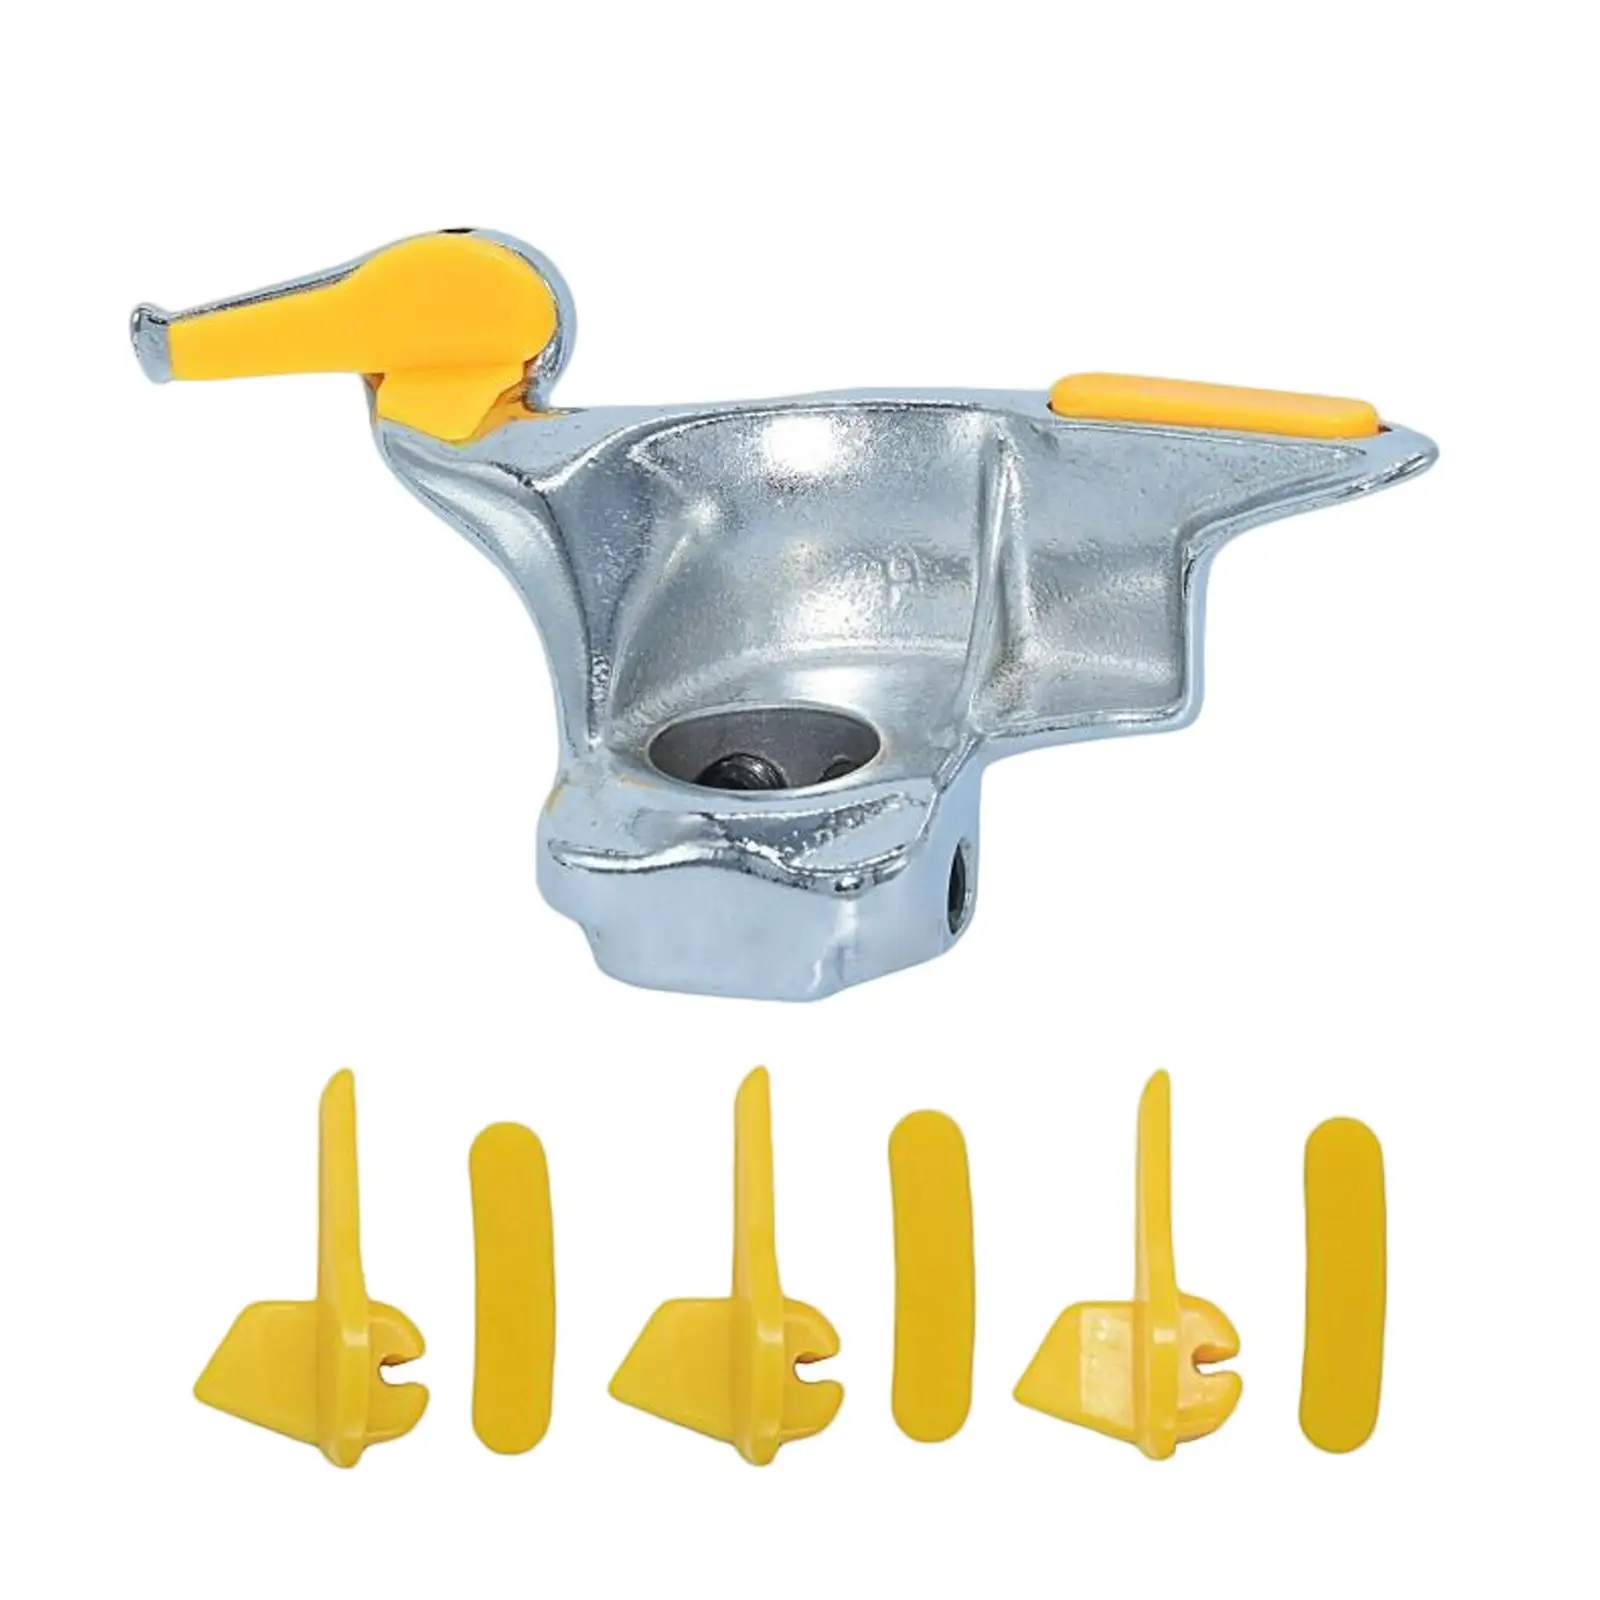 Tyre Changer Mount Demount Duck Head Durable Replacement with Rim Protector Tool